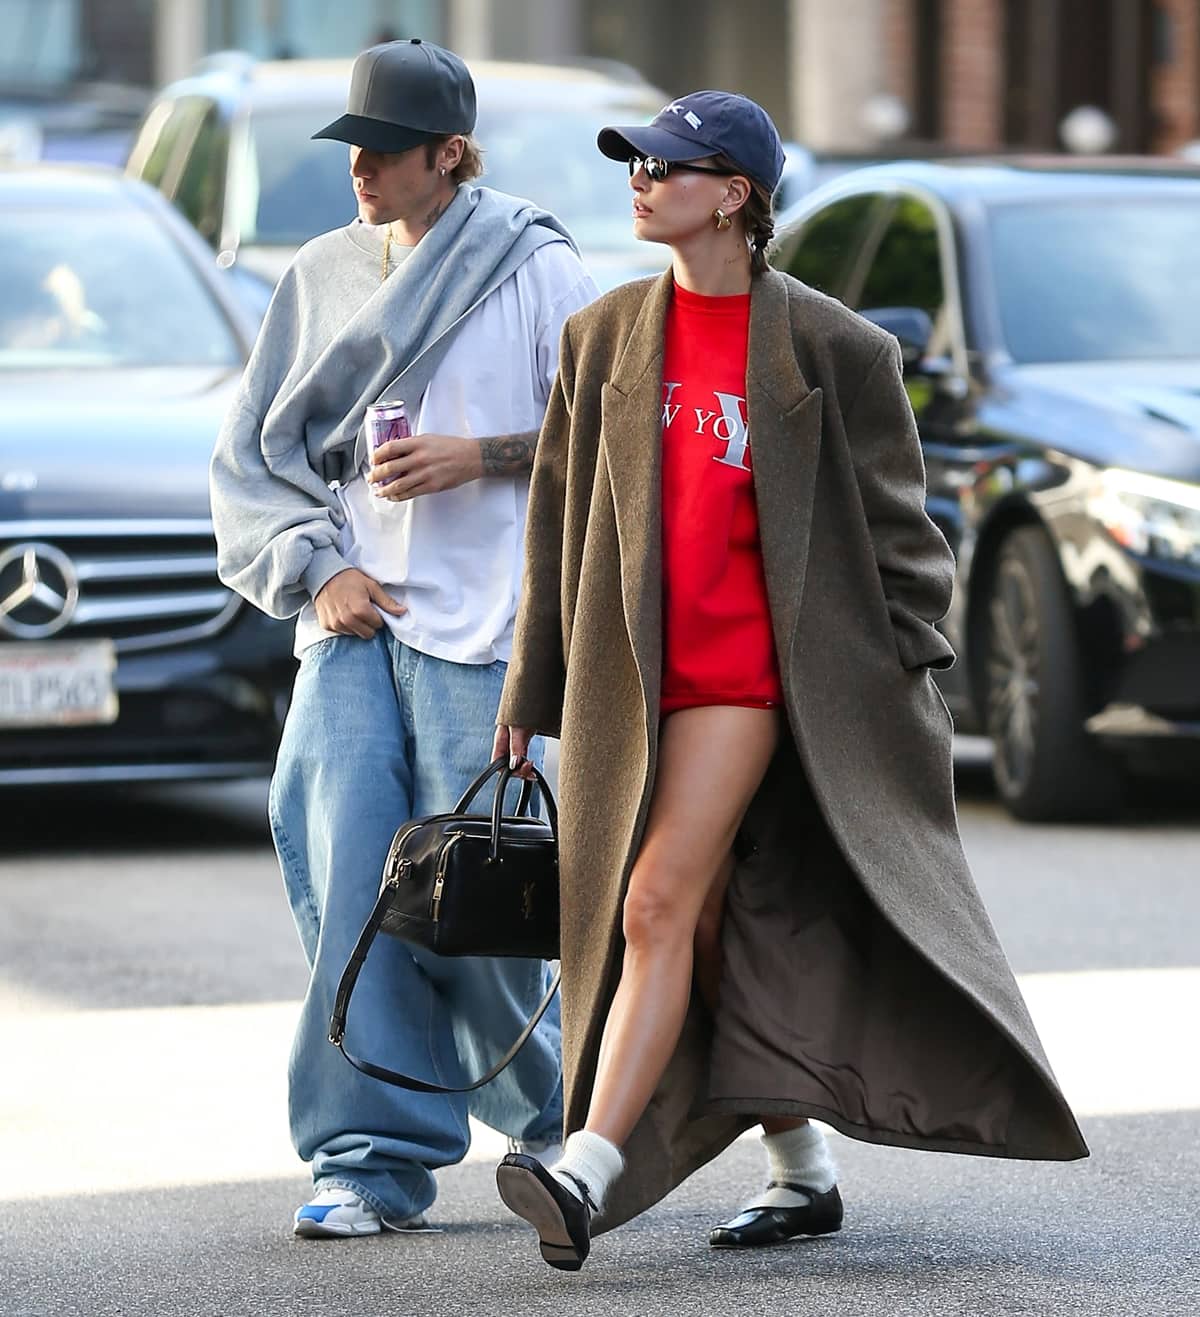 Joined by her husband, Justin Bieber, Hailey Bieber's outfit is elegantly completed by a flowing chestnut-brown coat, Sandy Liang Mary Jane Pointe shoes, and chic accessories, including gold hoop earrings and a black Nike cap